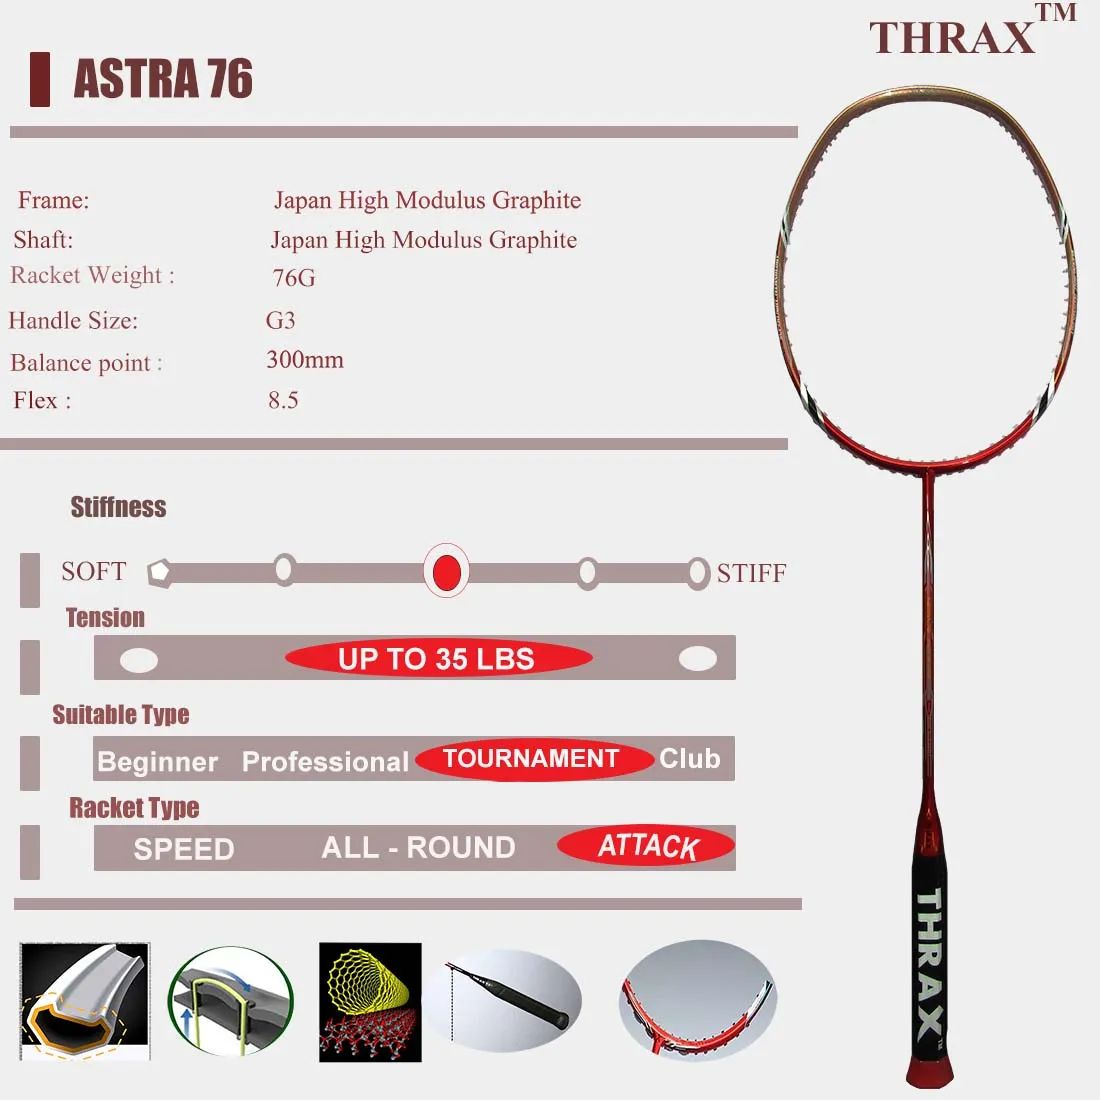 Thrax_Astra_76_Badminton_Racket_Specification_A